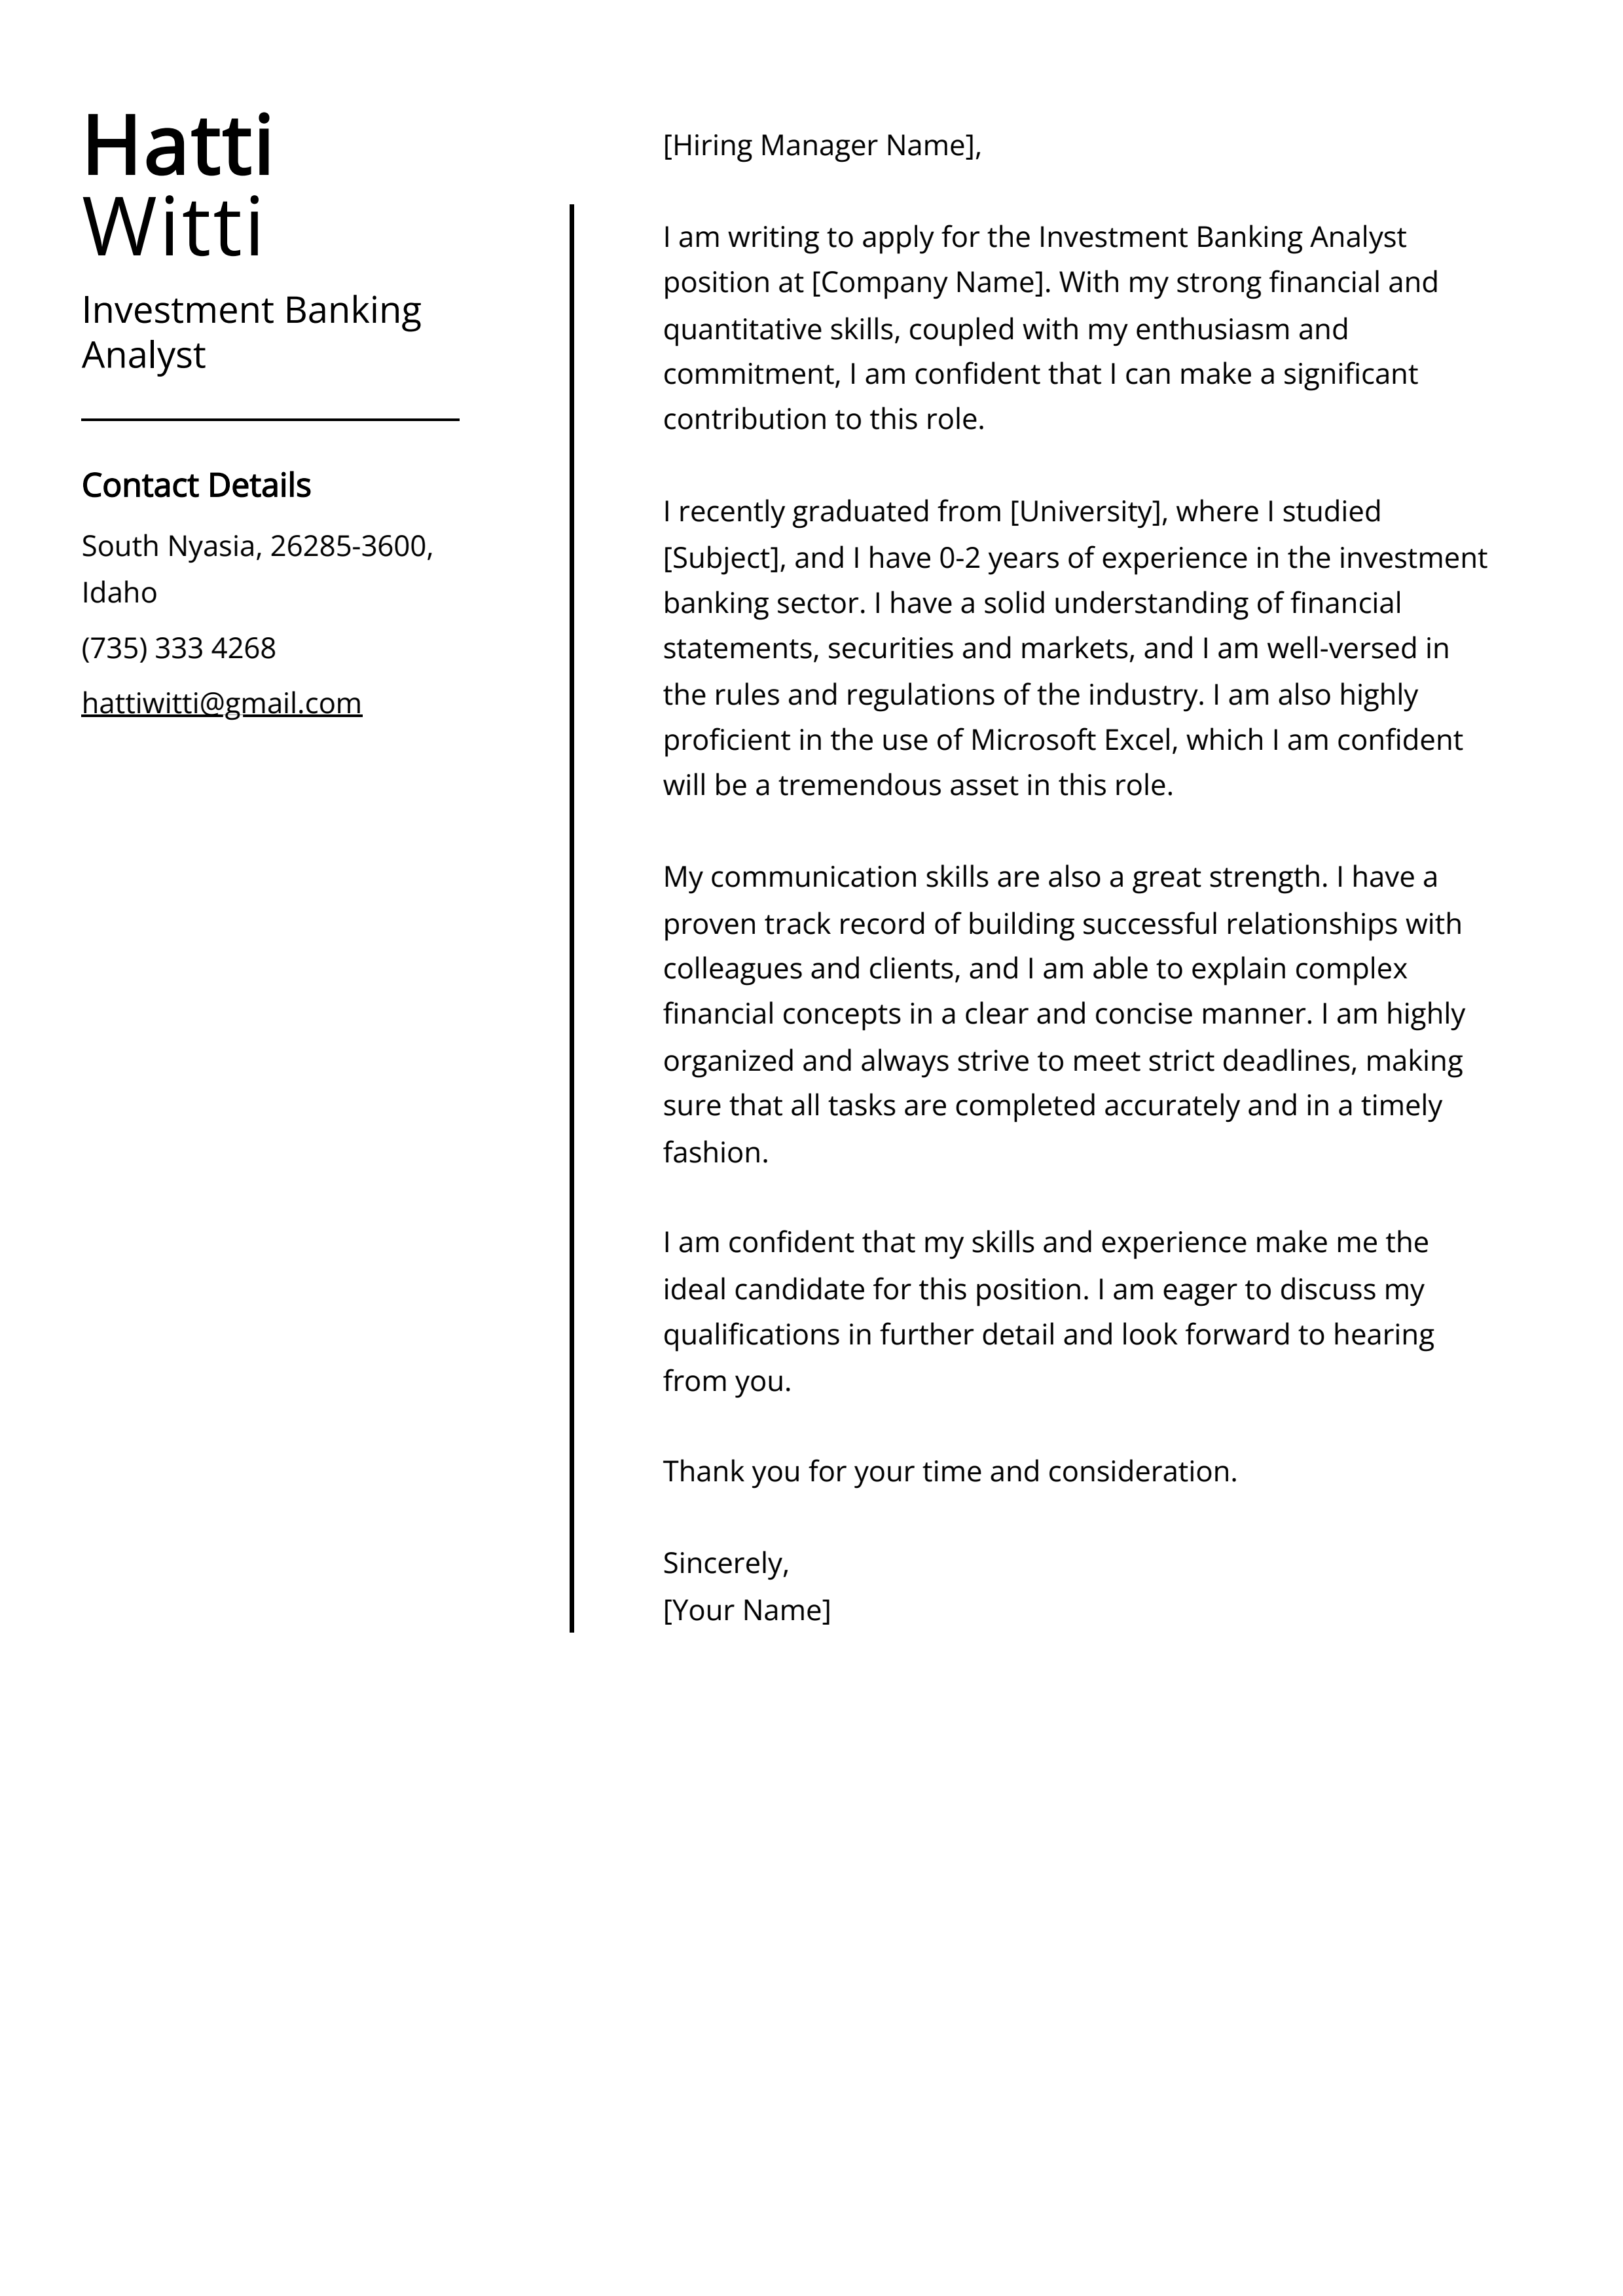 Investment Banking Analyst Cover Letter Example